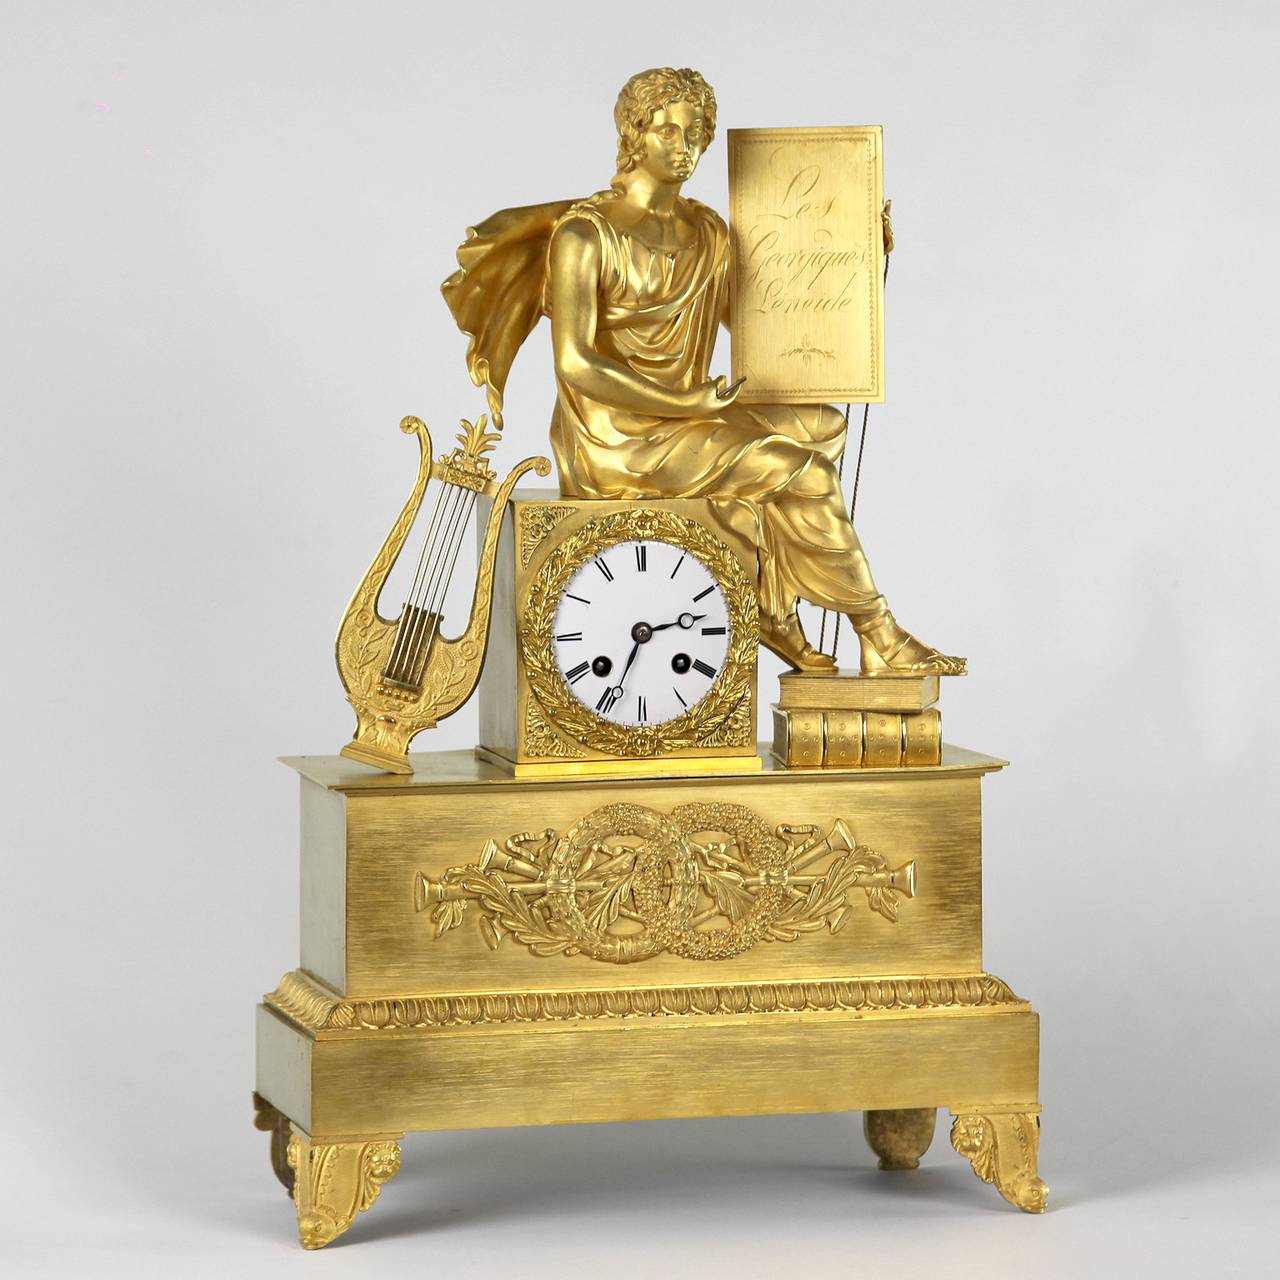 A very fine Empire ormolu figural mantel clock of eight day duration, with enamel dial and Roman numerals and a pair of blued steel hands for the hours and minutes. The movement with silk thread suspension, anchor escapement, striking on the hour